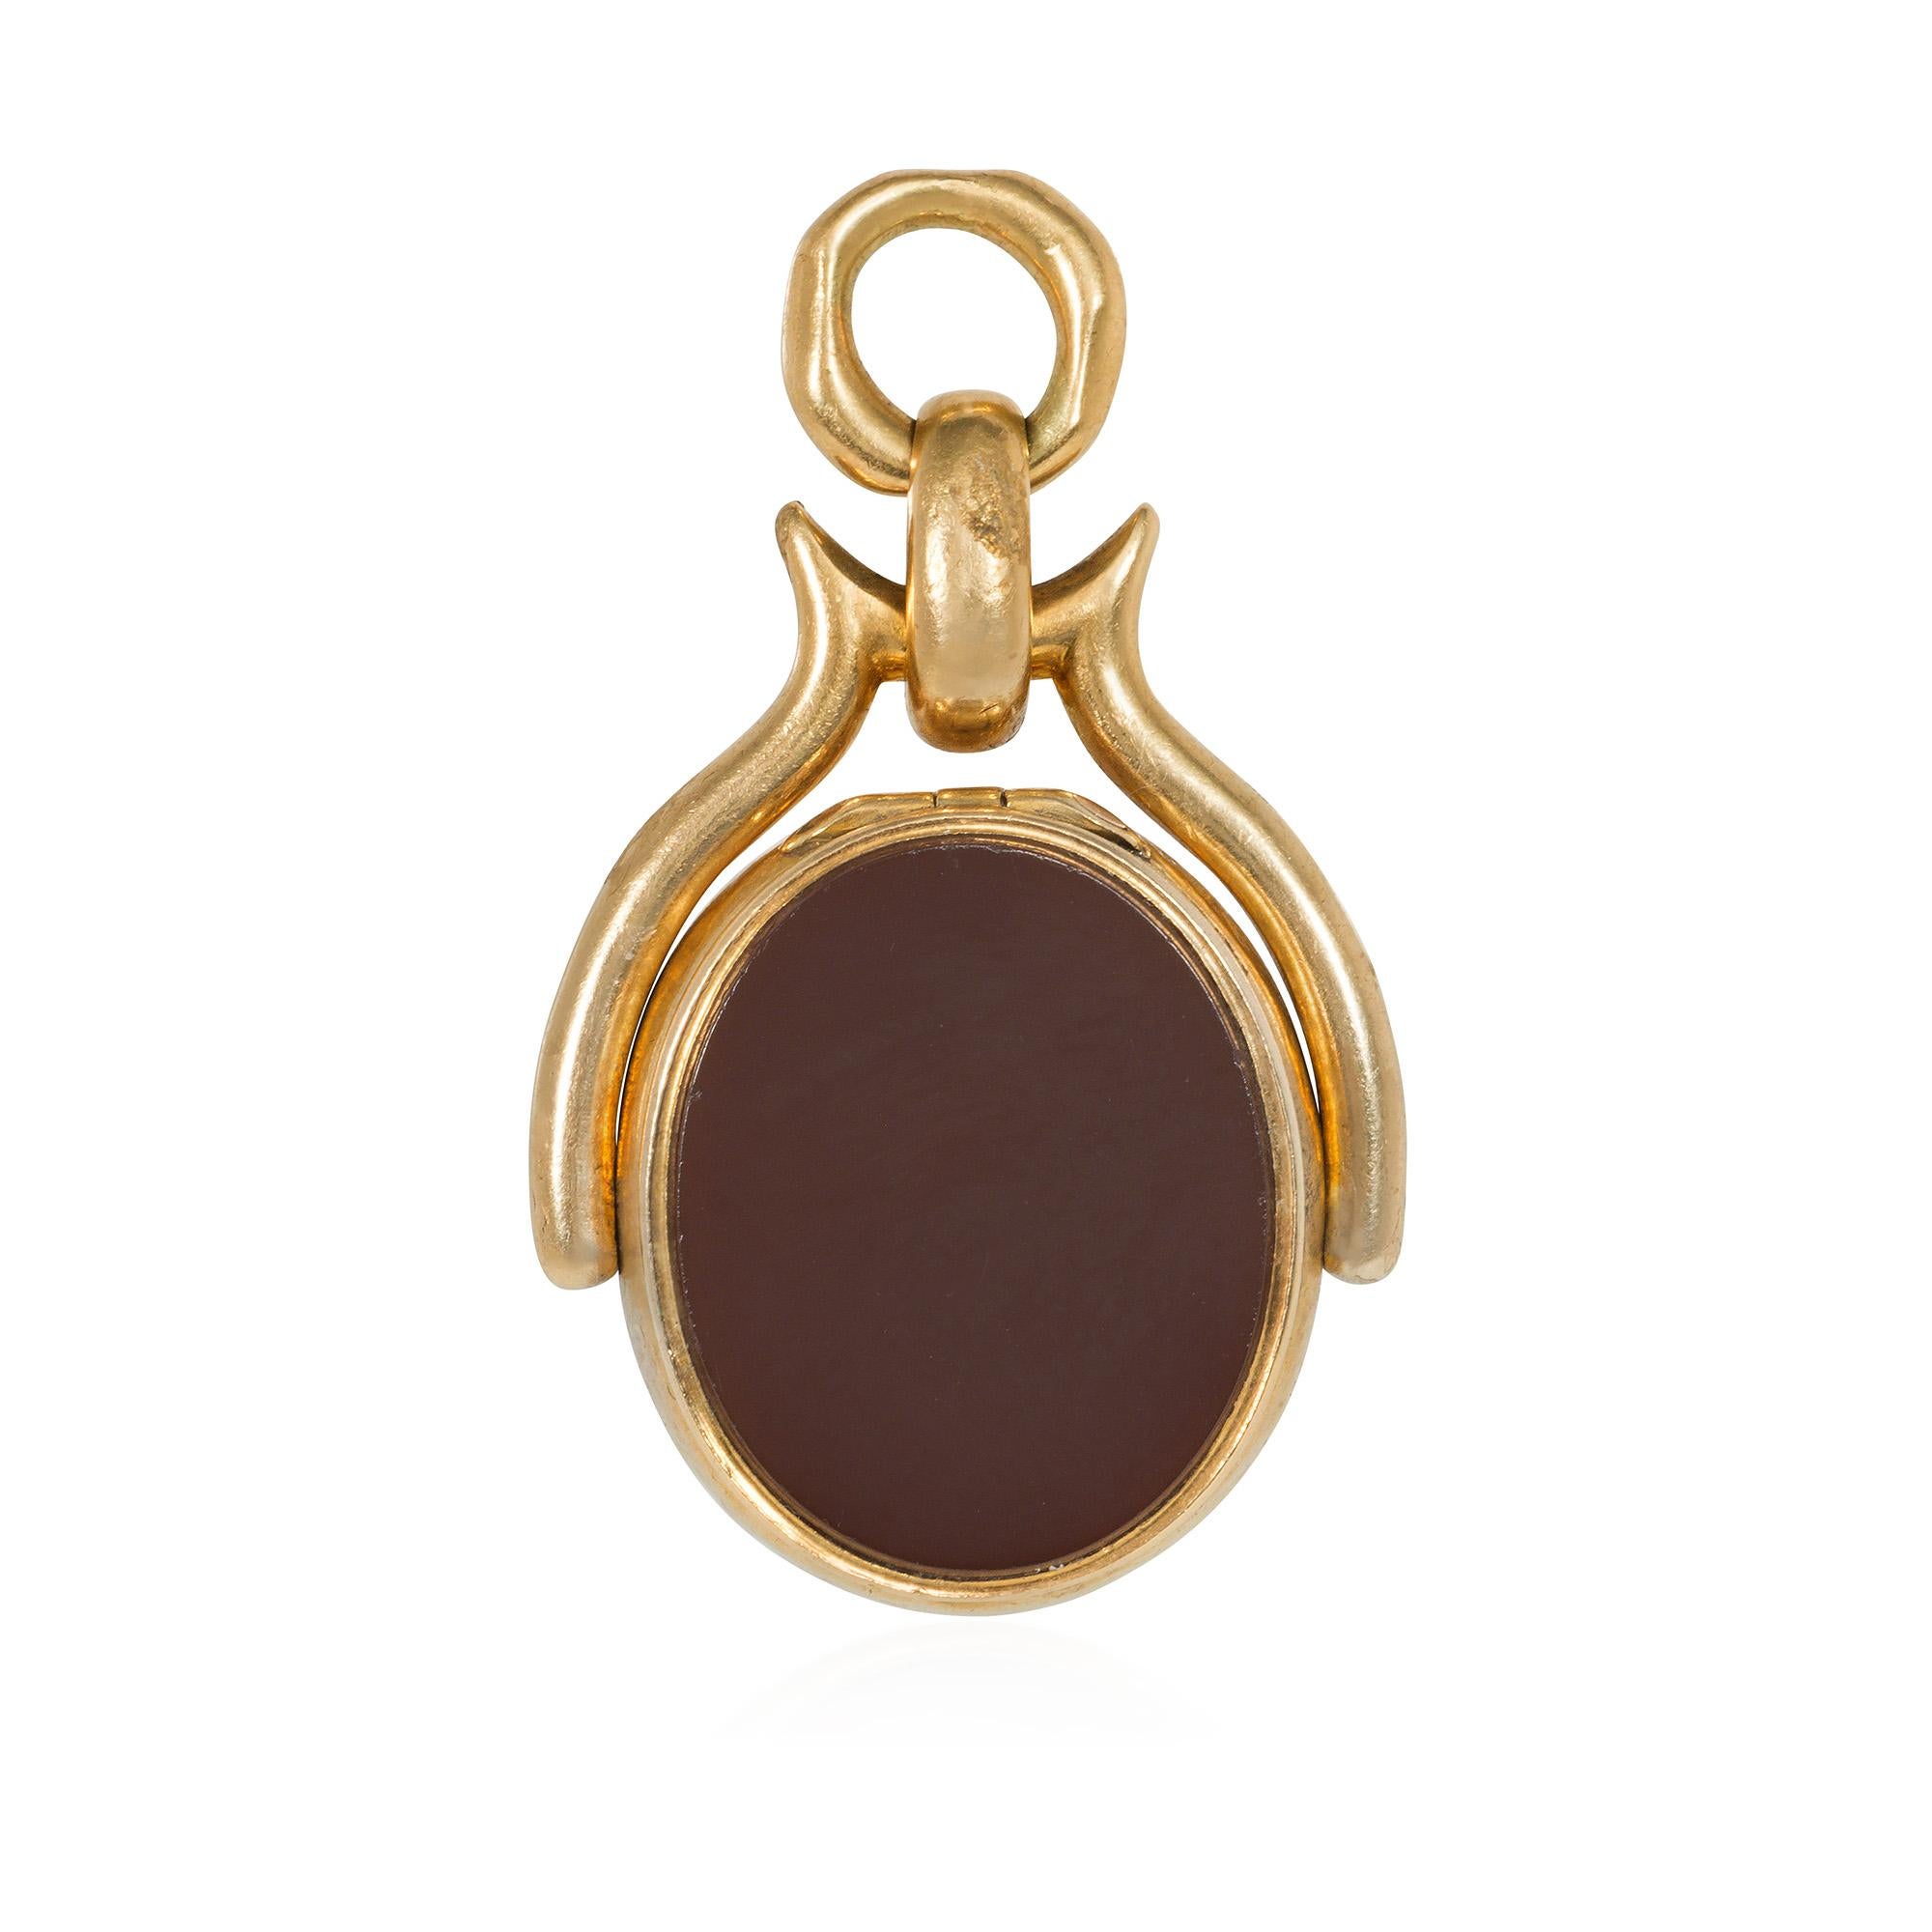 An antique Victorian period gold swivel locket pendant with an oval bloodstone panel on one side and a jasper panel on the verso, in 15k.  The hinged jasper side opens to reveal an internal compartment.  England  (Chain sold separately.)

* Free